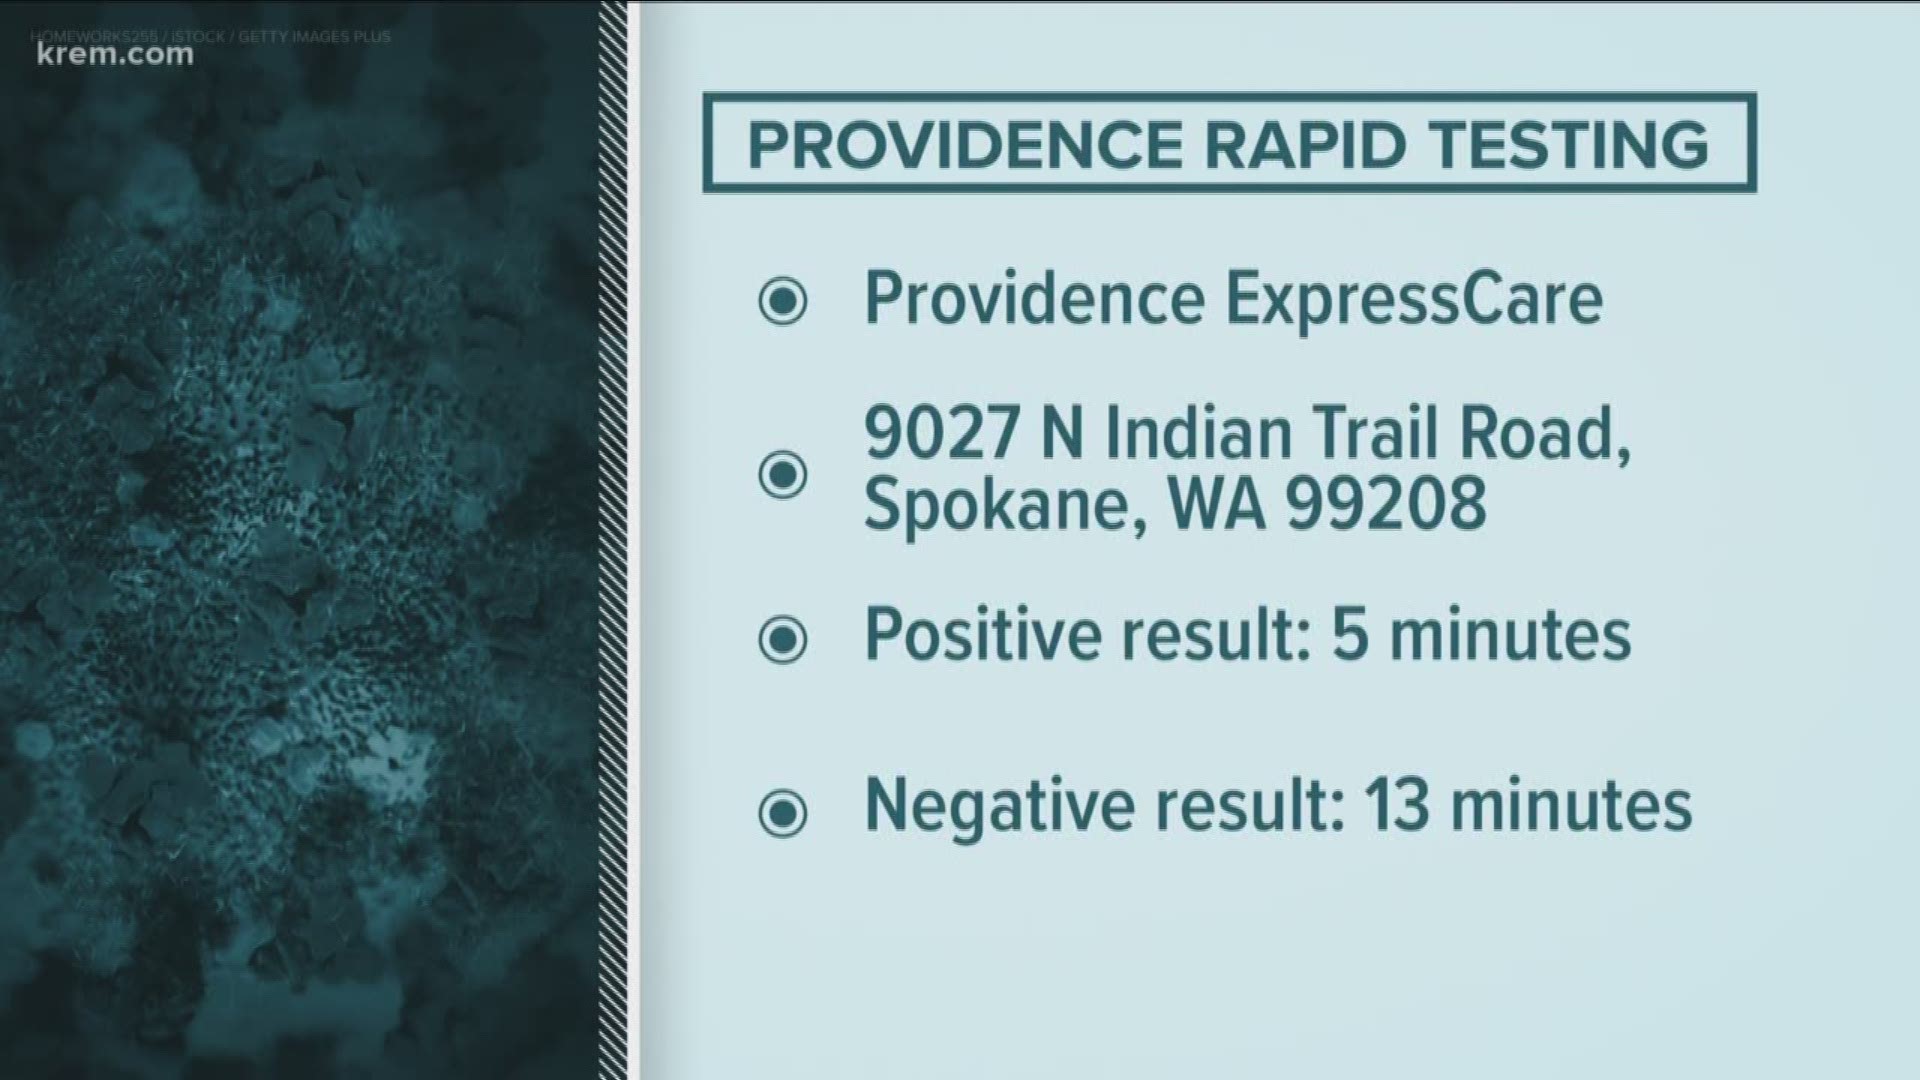 Providence ExpressCare in Spokane will be able to deliver a positive test result in as little as five minutes and a negative test result in 13 minutes.